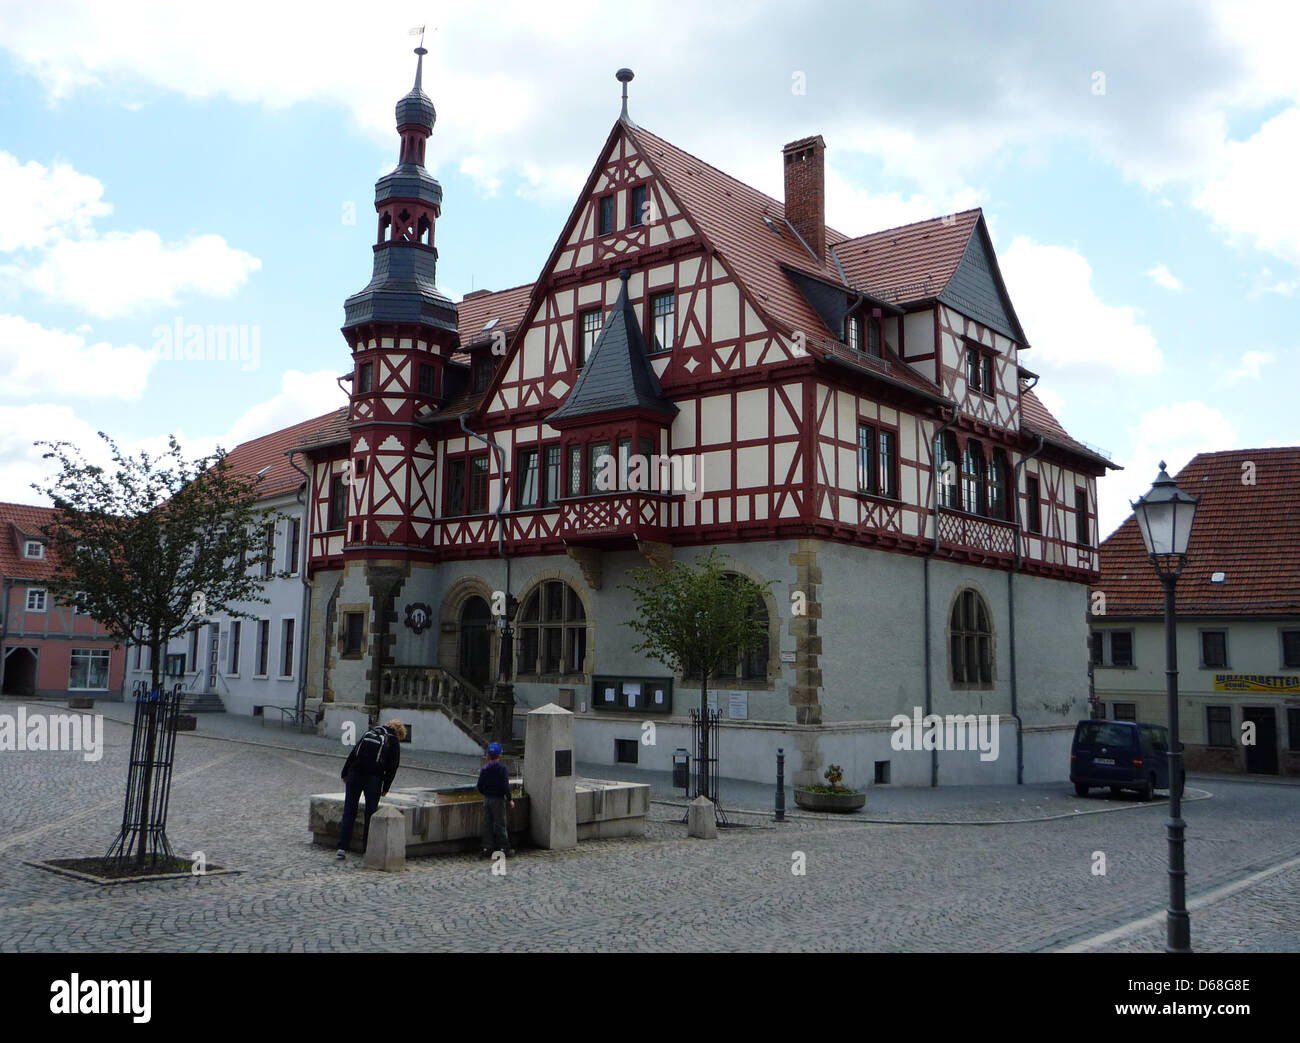 The framework city hall is pictured on the historical Marktplatz in Harzgerode, Germany, 25 June 2012. Photo: Archive Neumann Stock Photo